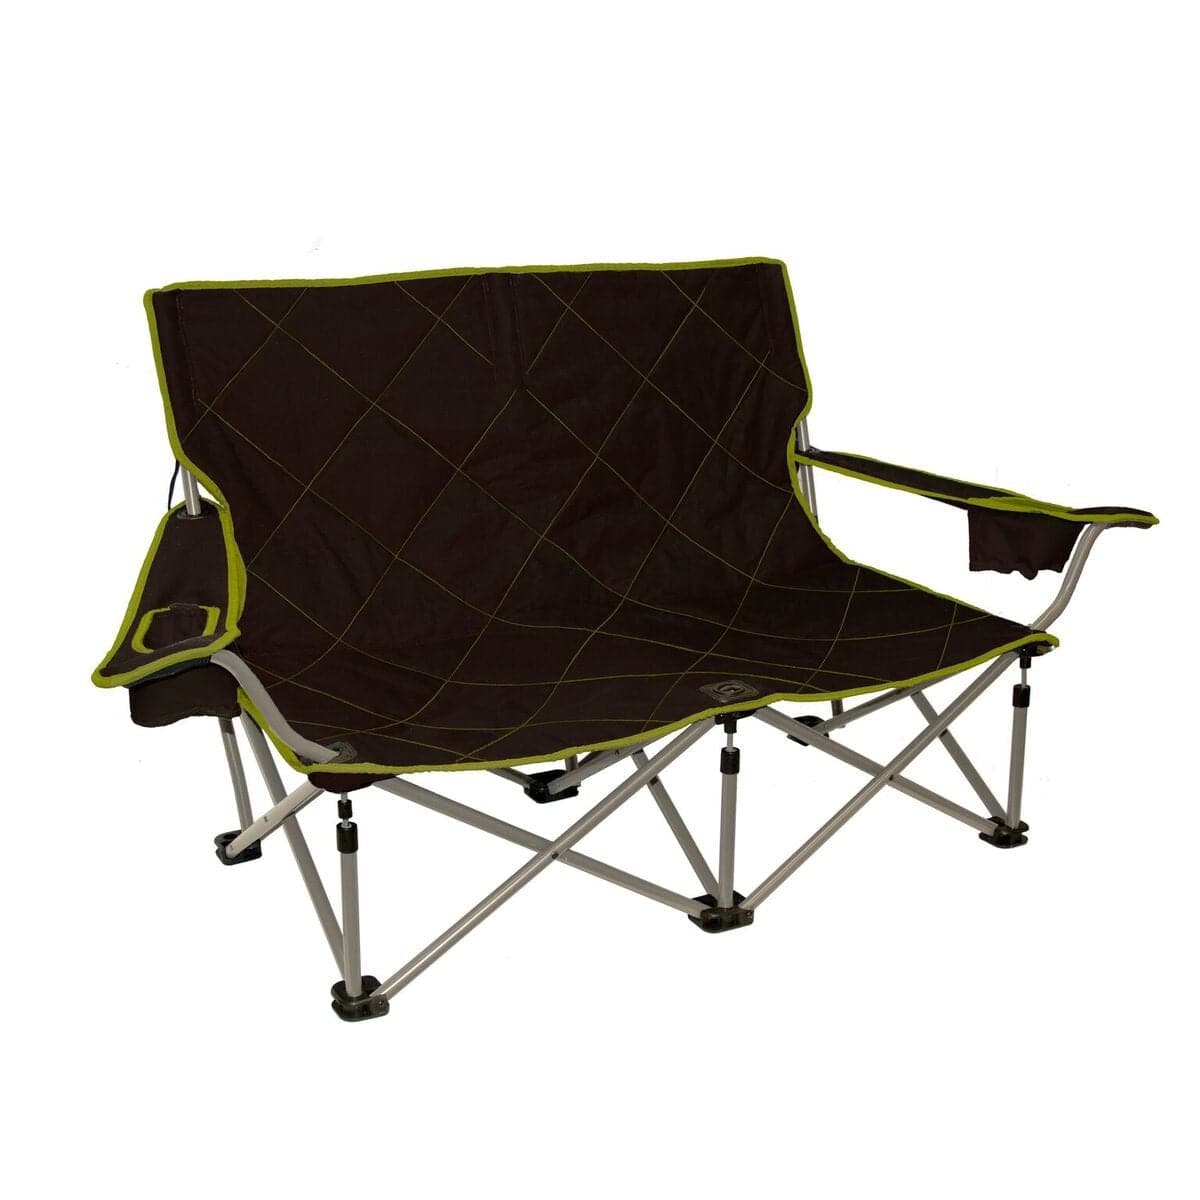 Featuring the Shorty Camp Couch camp couch, chair, table manufactured by Travel Chair shown here from one angle.